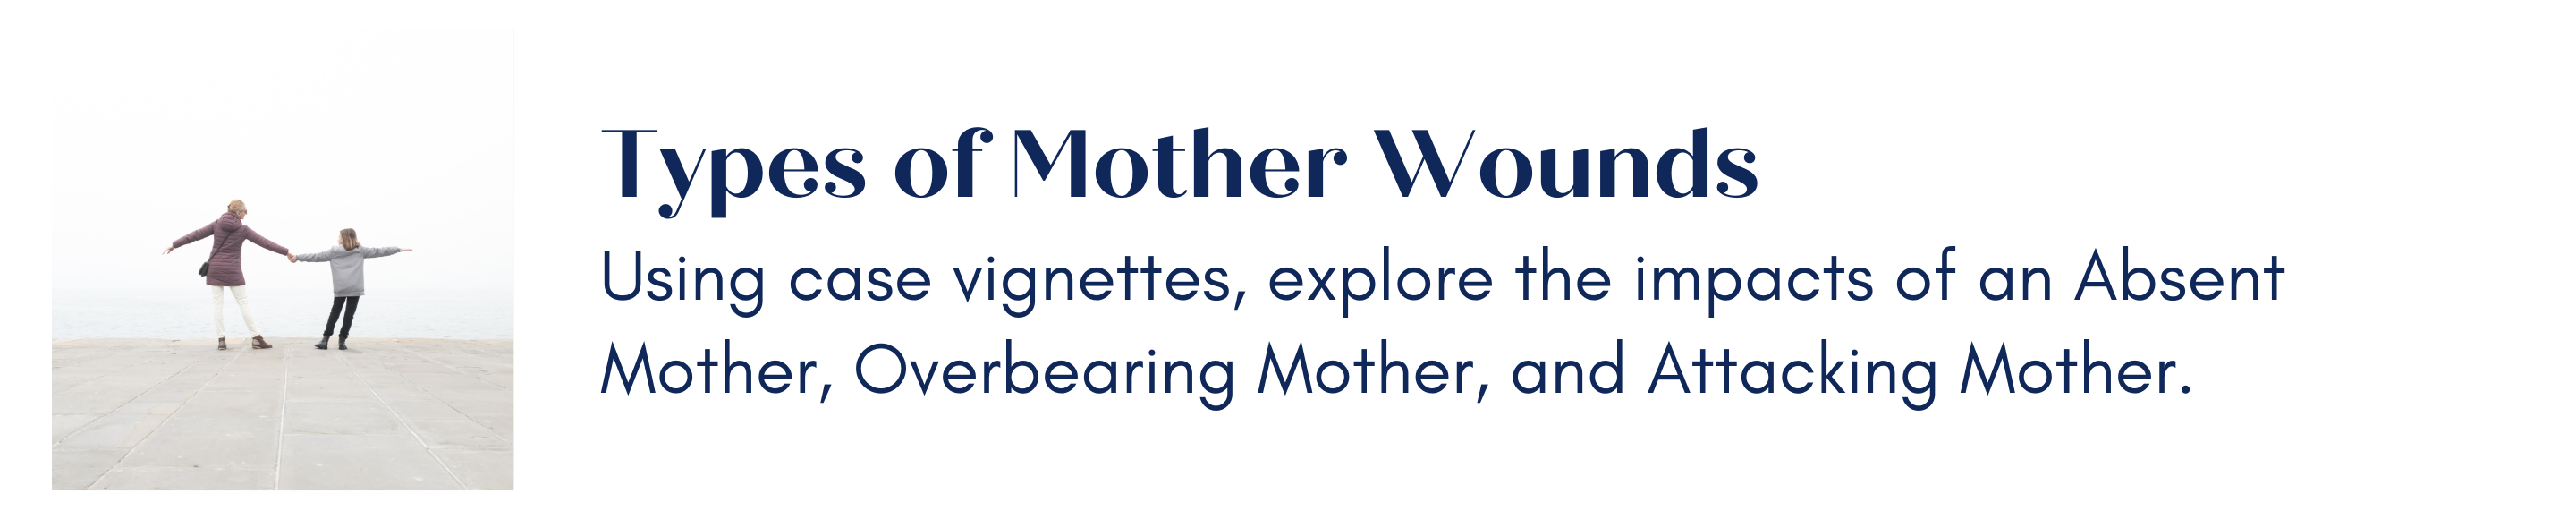 Types of Mother Wounds